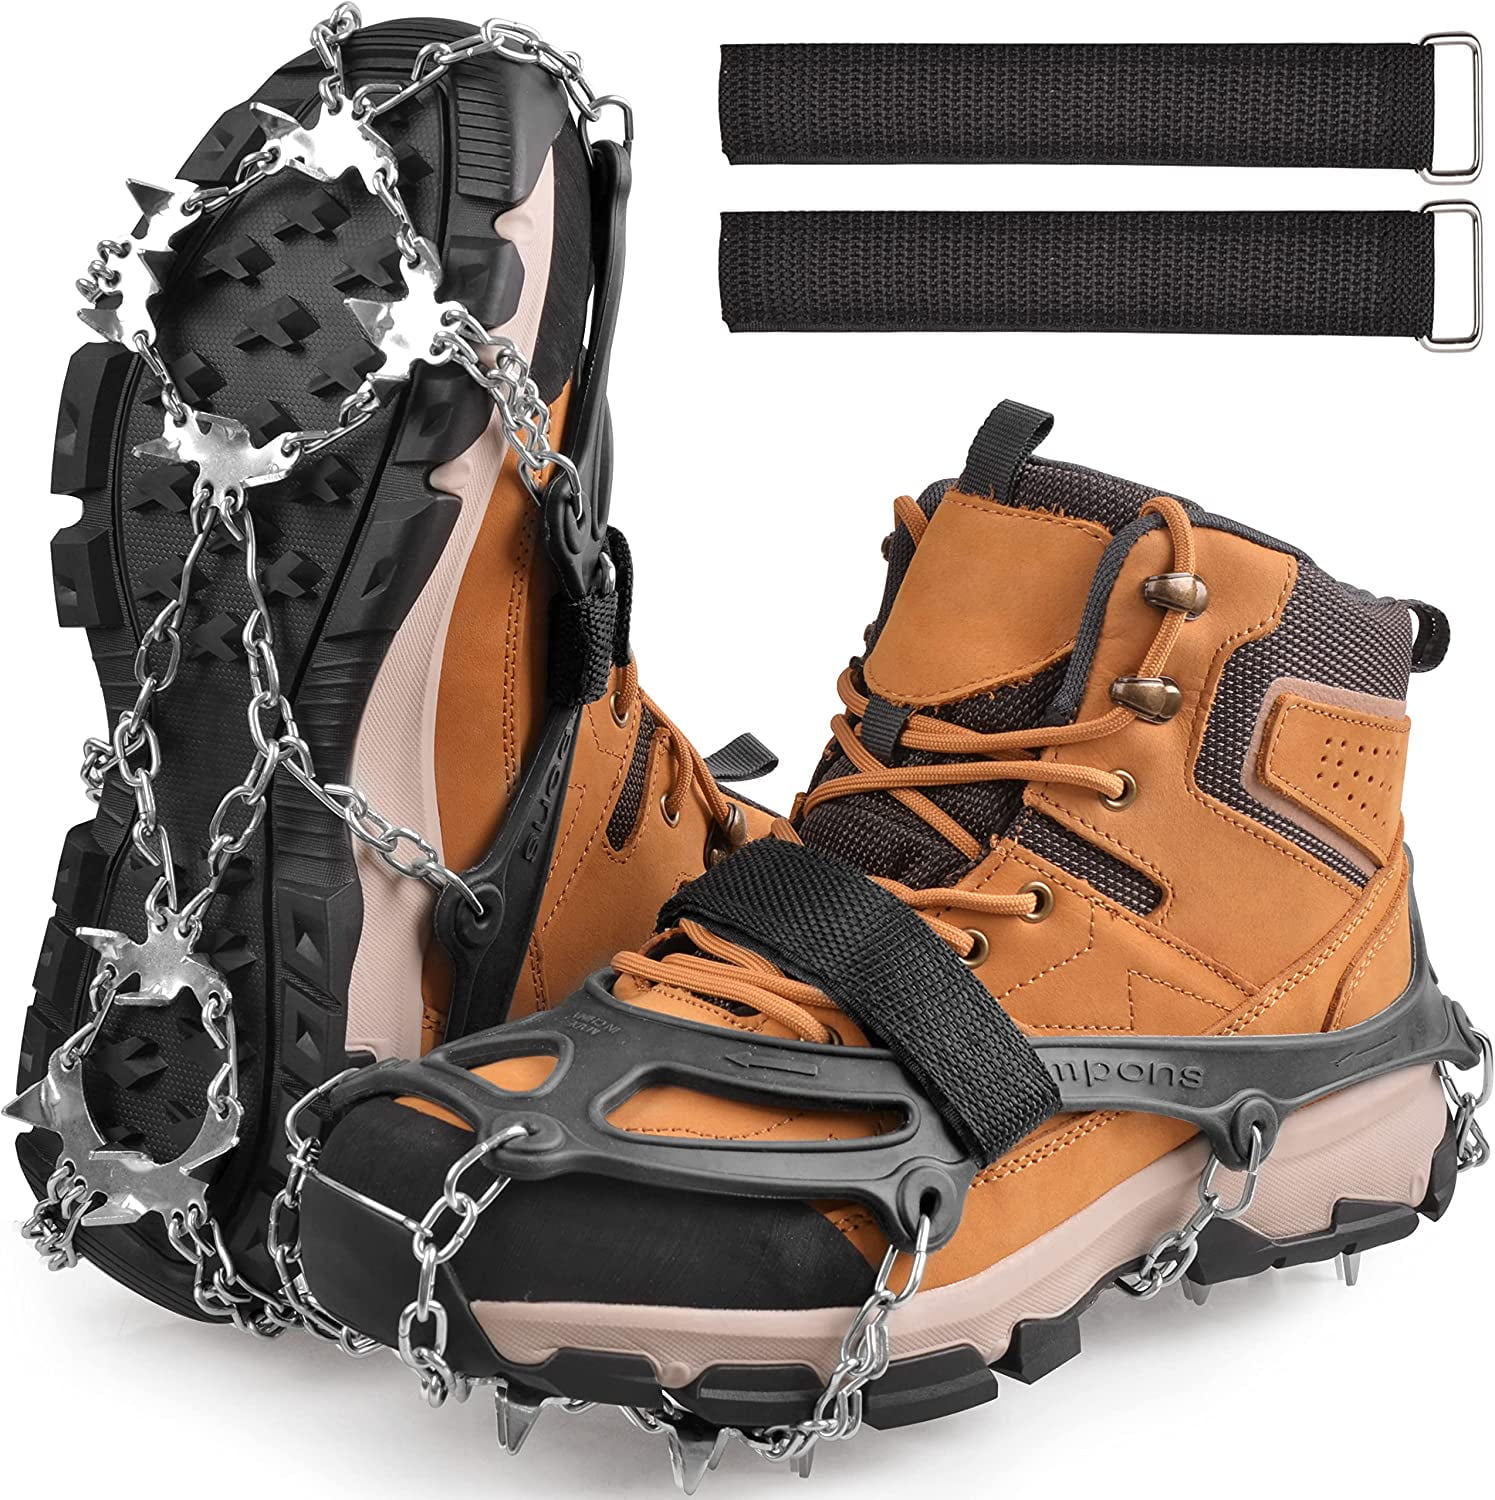 Ice Cleats Snows Crampons Walk Traction Cleats for Boots Shoes, 19 ...